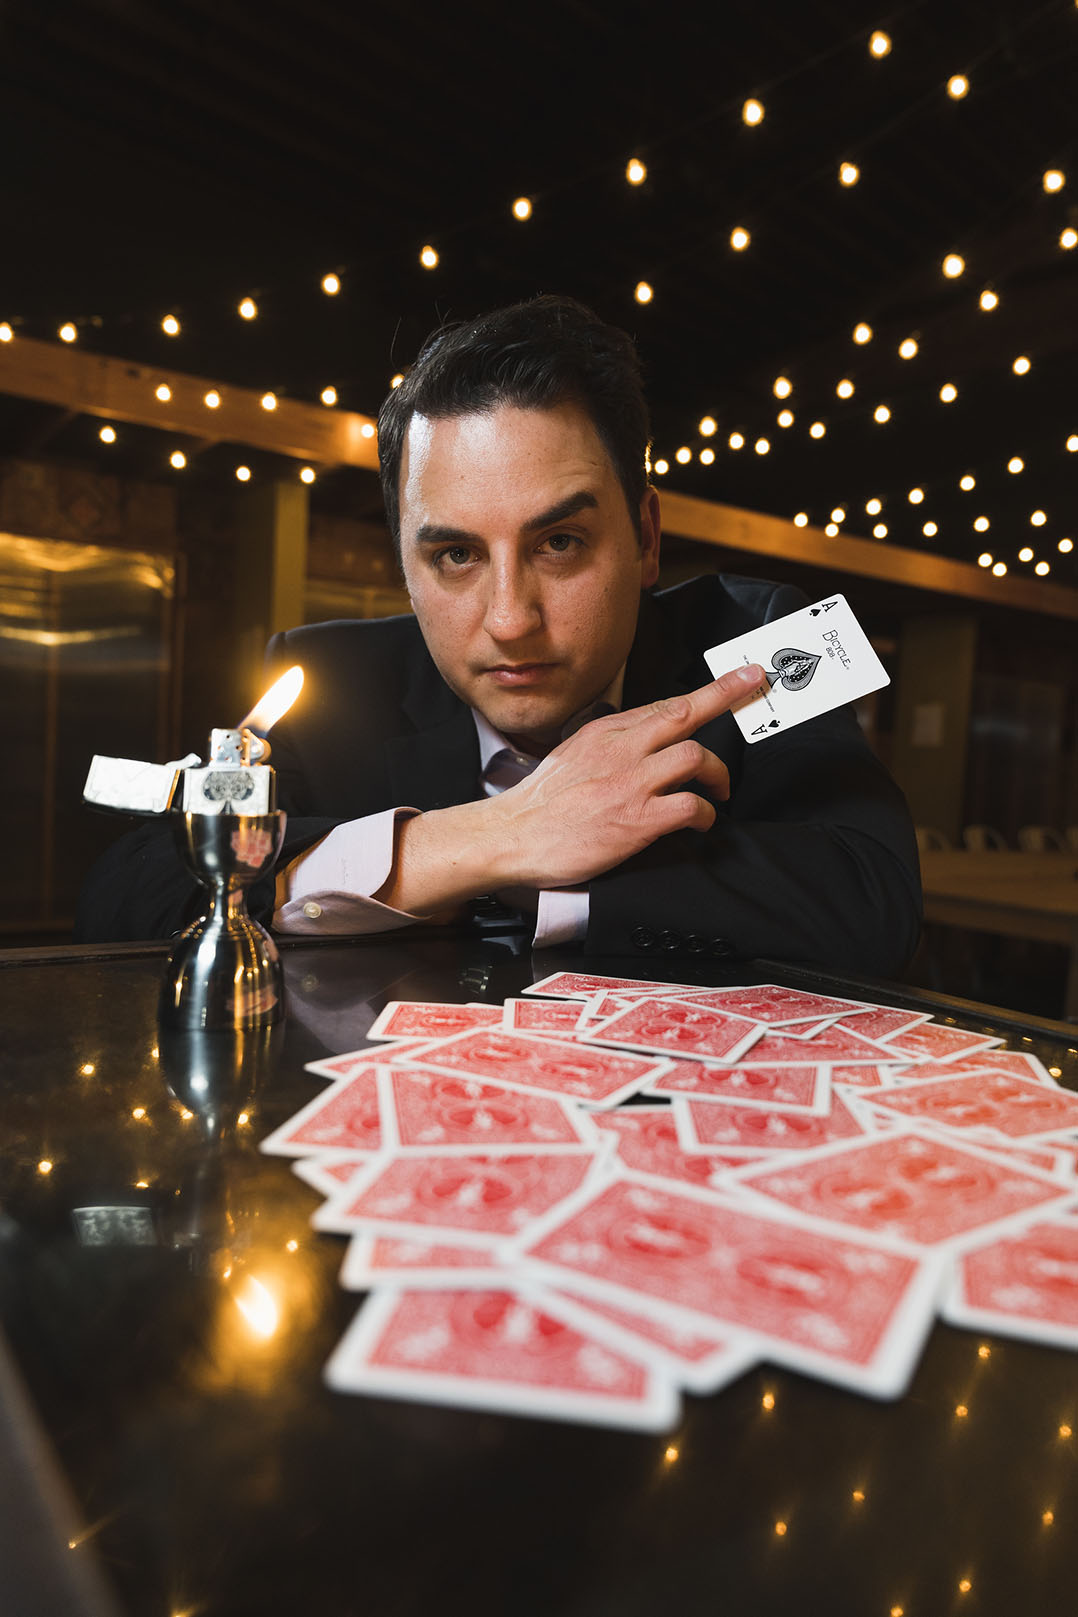 Magician holds shows at Feinstein’s • Current Publishing